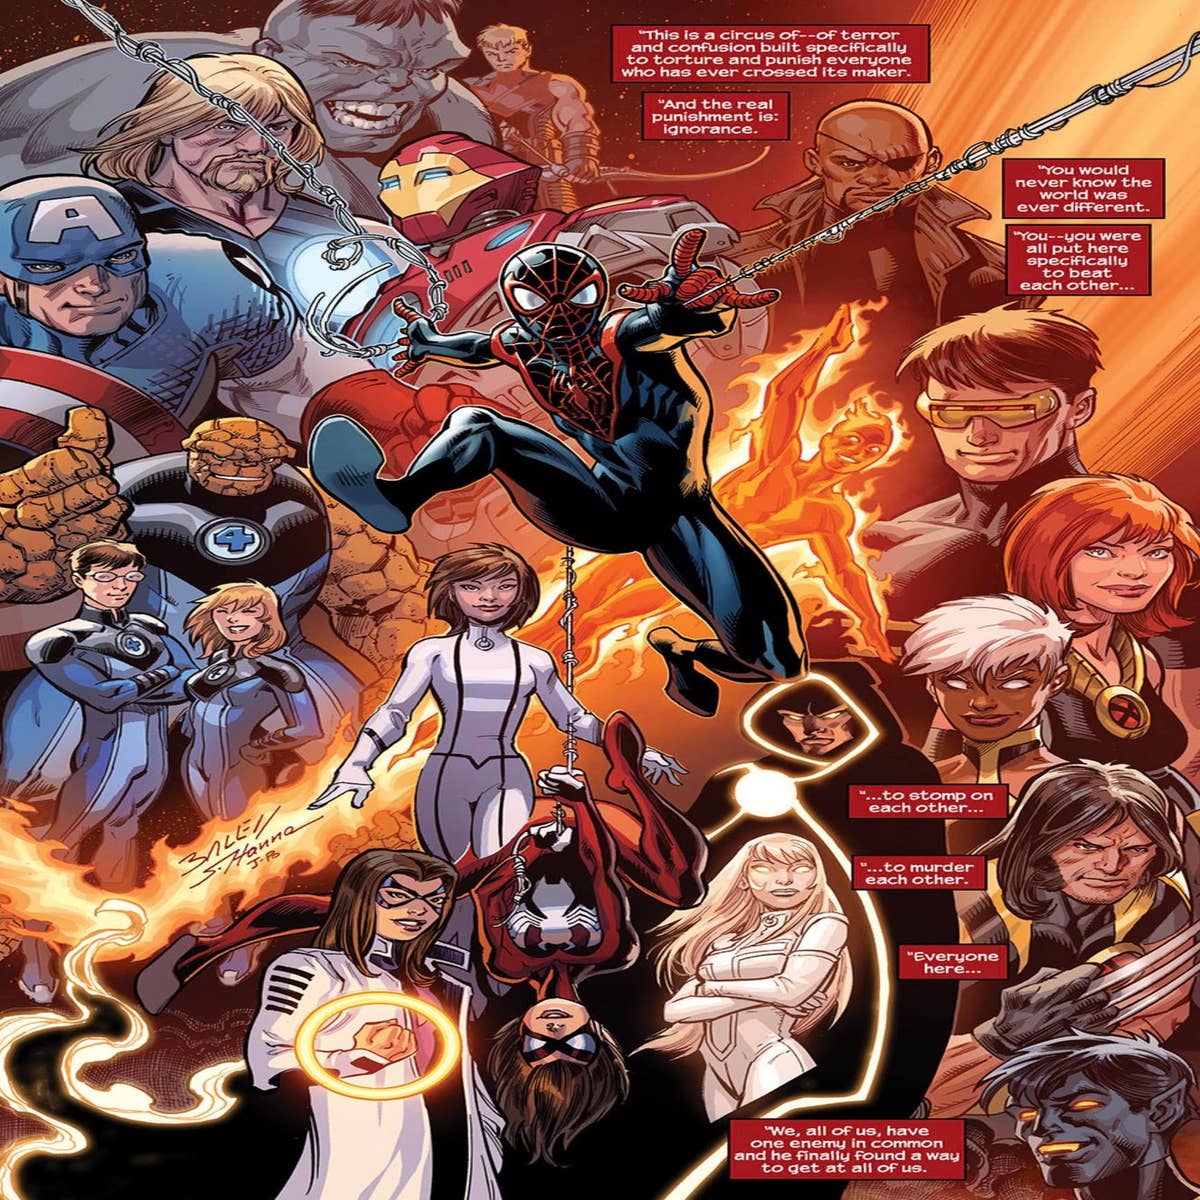 Avengers issue 5 (2023) - Read free comics online